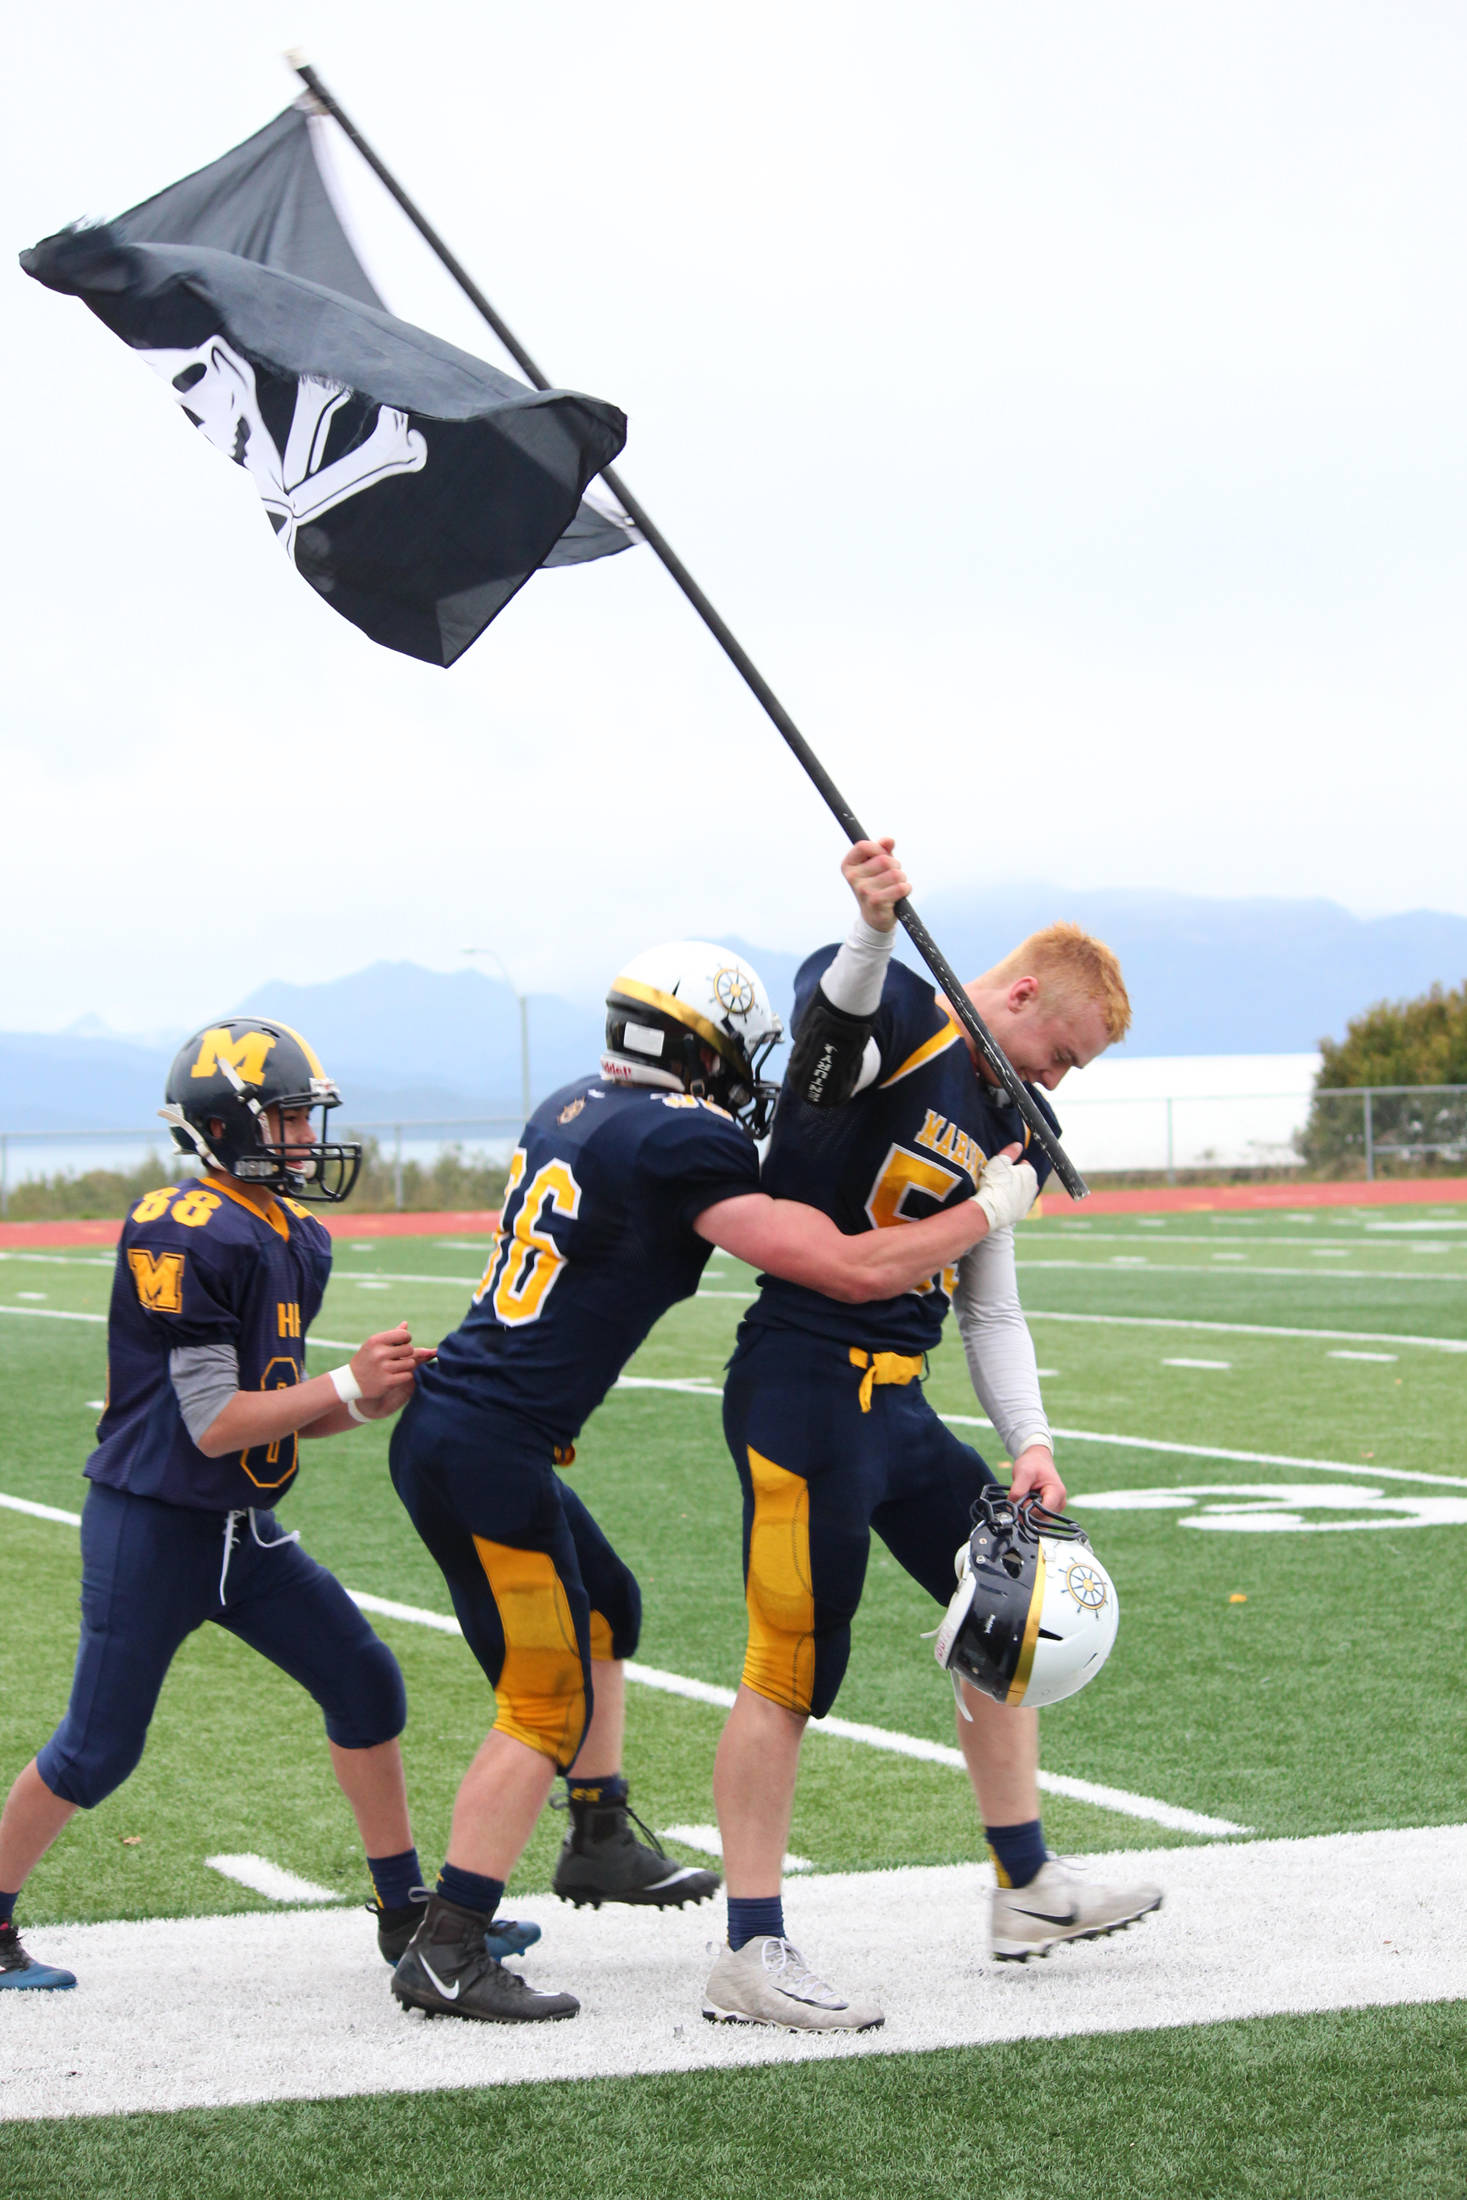 Senior Levi Smith gets a hug from a teammate as he walks of the field at Homer High School carrying a pirate flag Saturday, Oct. 7, 2017 following the varsity football team’s win over Ben Eielson High School 33-21 in Homer, Alaska. The Mariners now head to the ASAA First National Bowl Series Division III Championship. (Photo by Megan Pacer/Homer News)